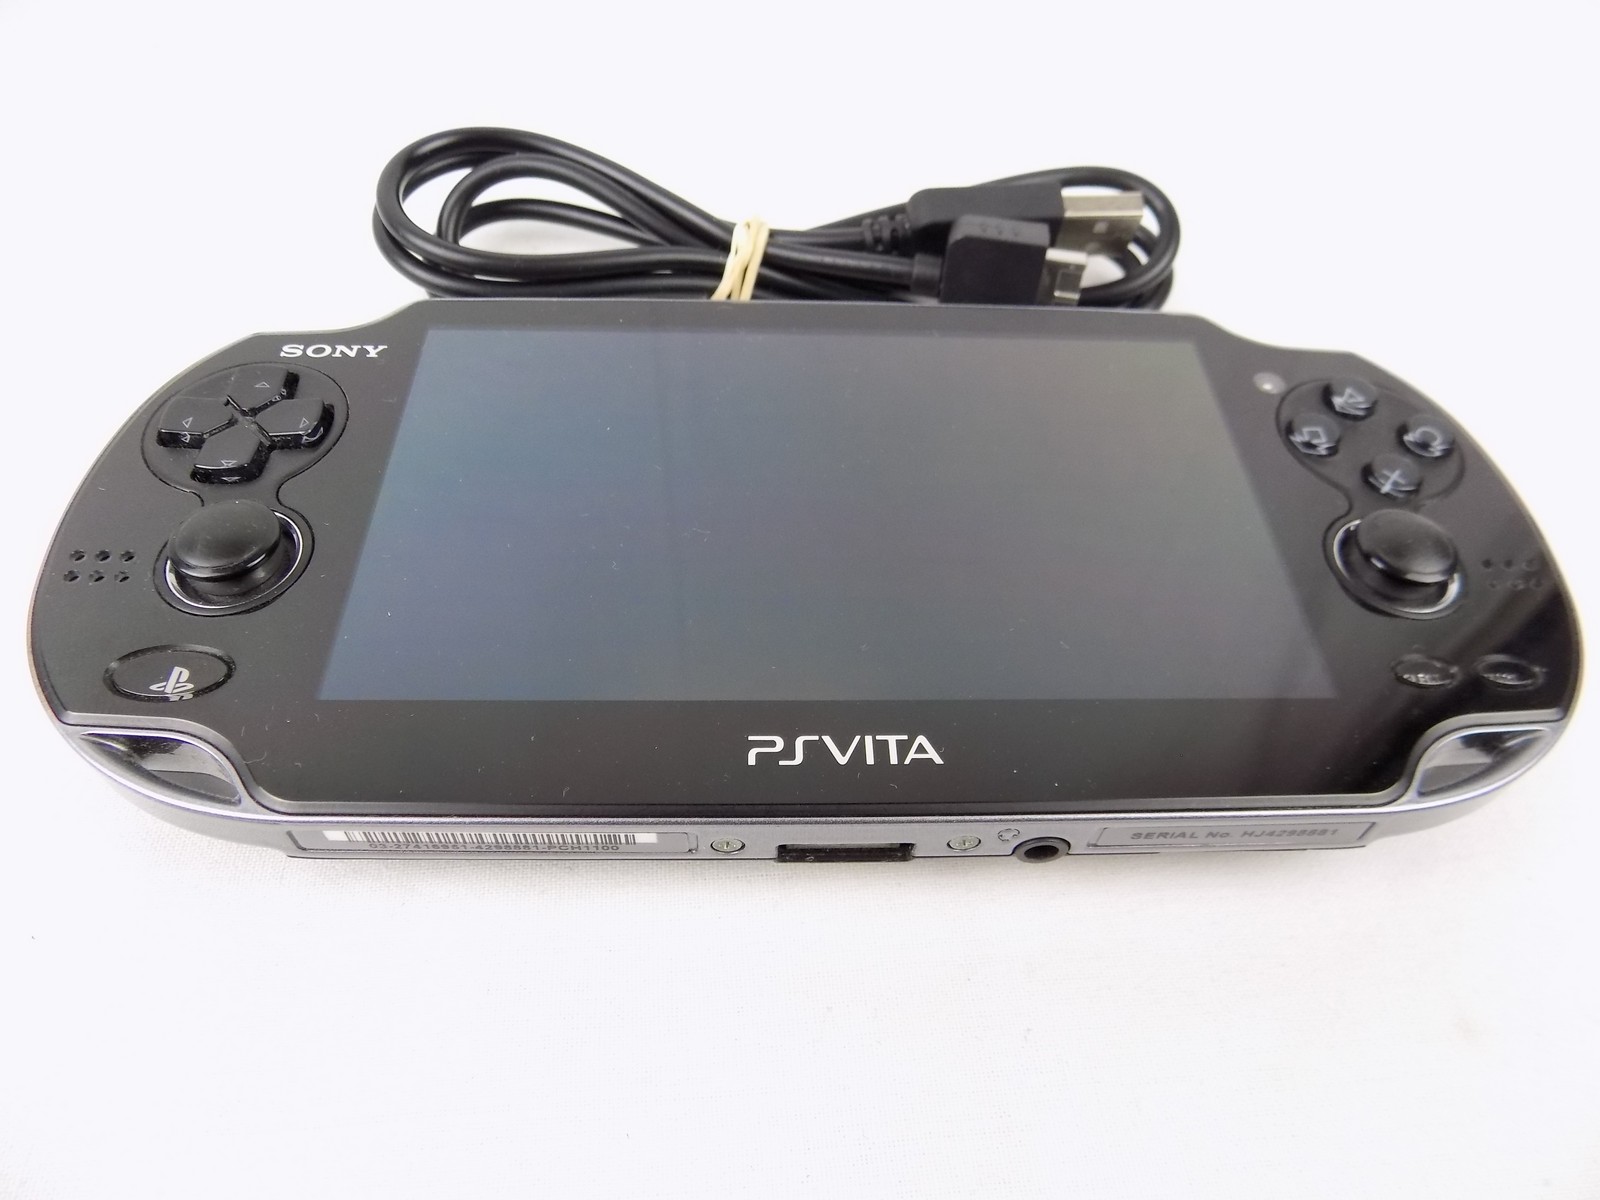 Like New Sony Ps Vita PCH 1000 Black Oled Console + Charger - Tested